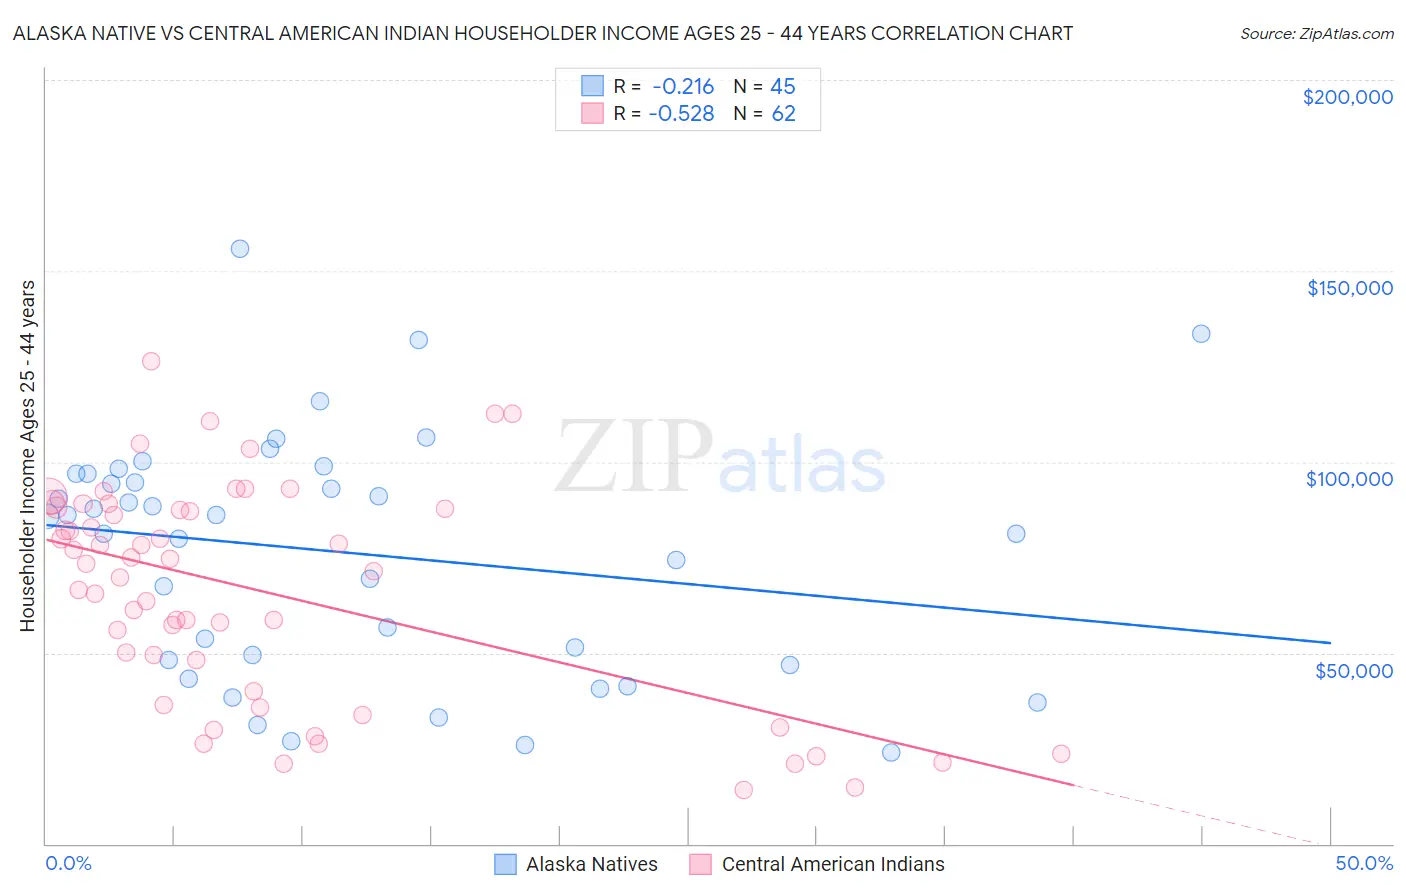 Alaska Native vs Central American Indian Householder Income Ages 25 - 44 years